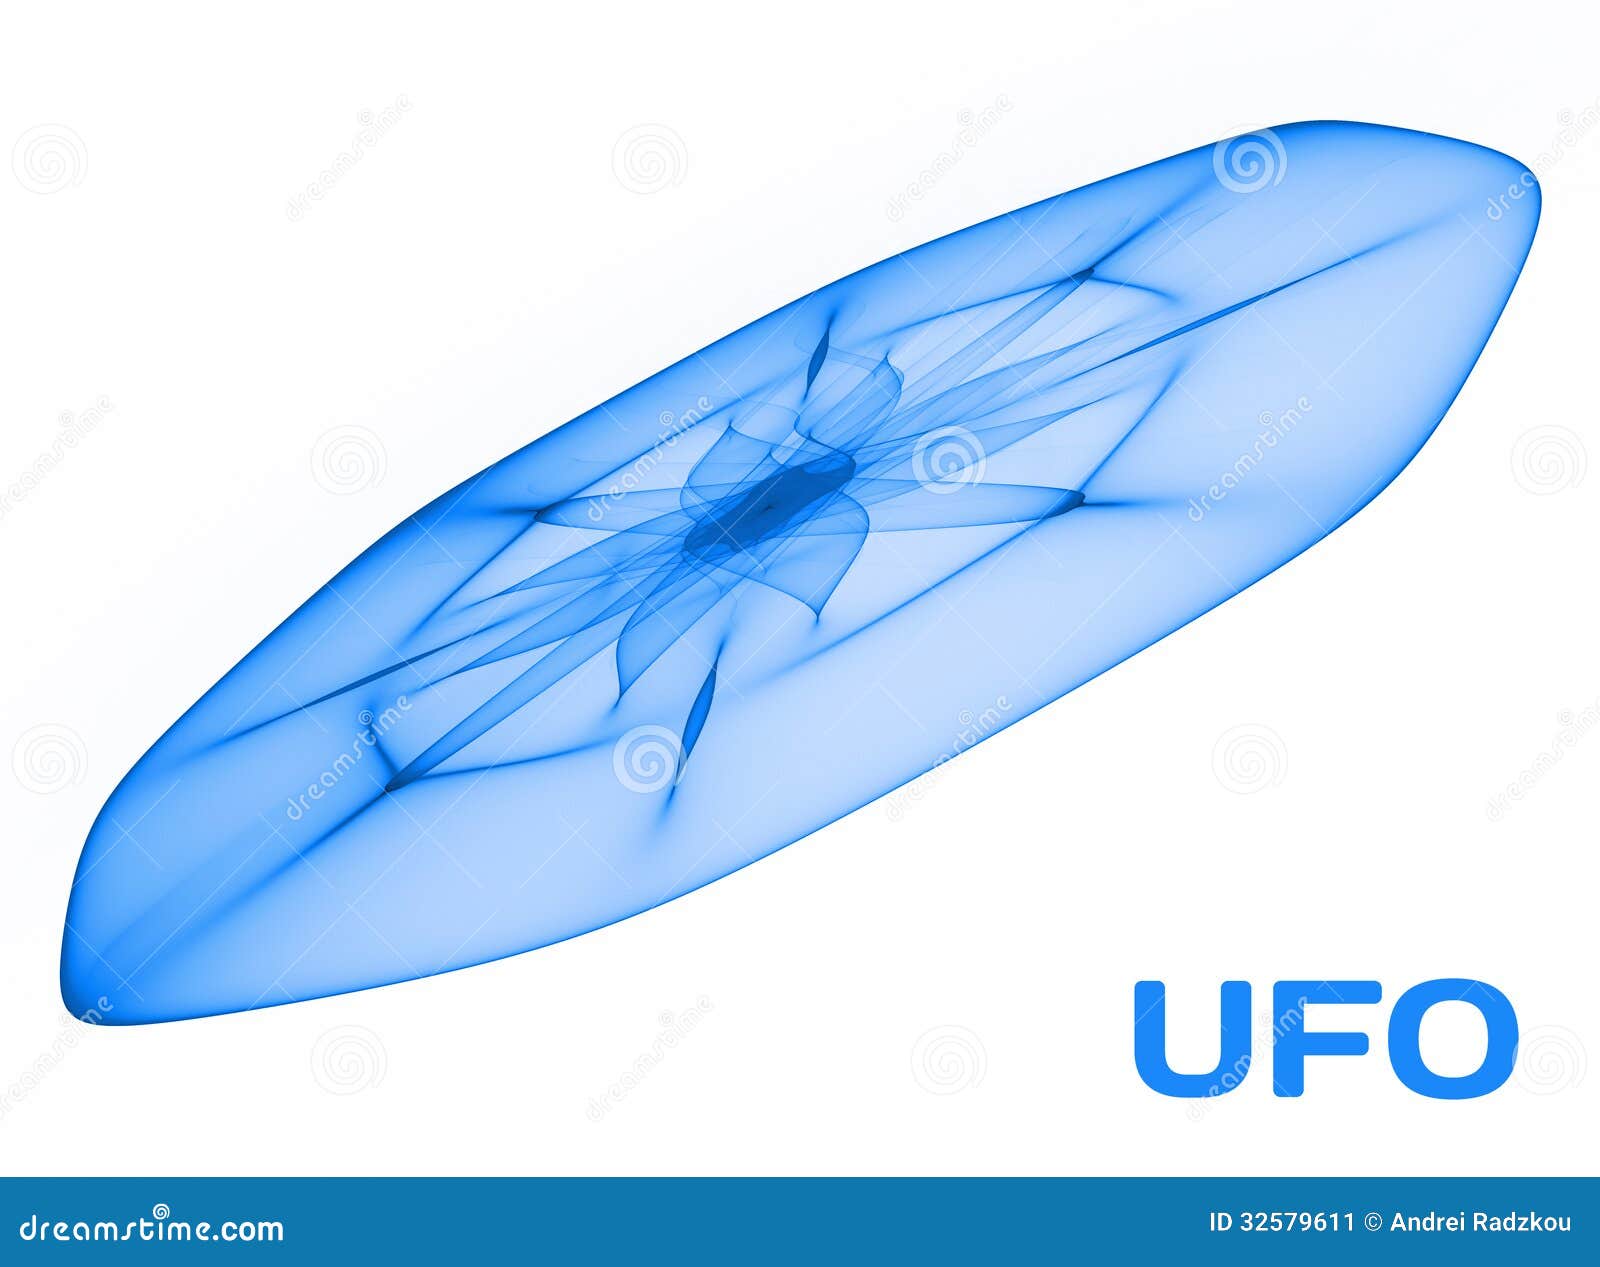 https://thumbs.dreamstime.com/z/unidentified-flying-object-blue-u-f-o-isolated-white-background-32579611.jpg